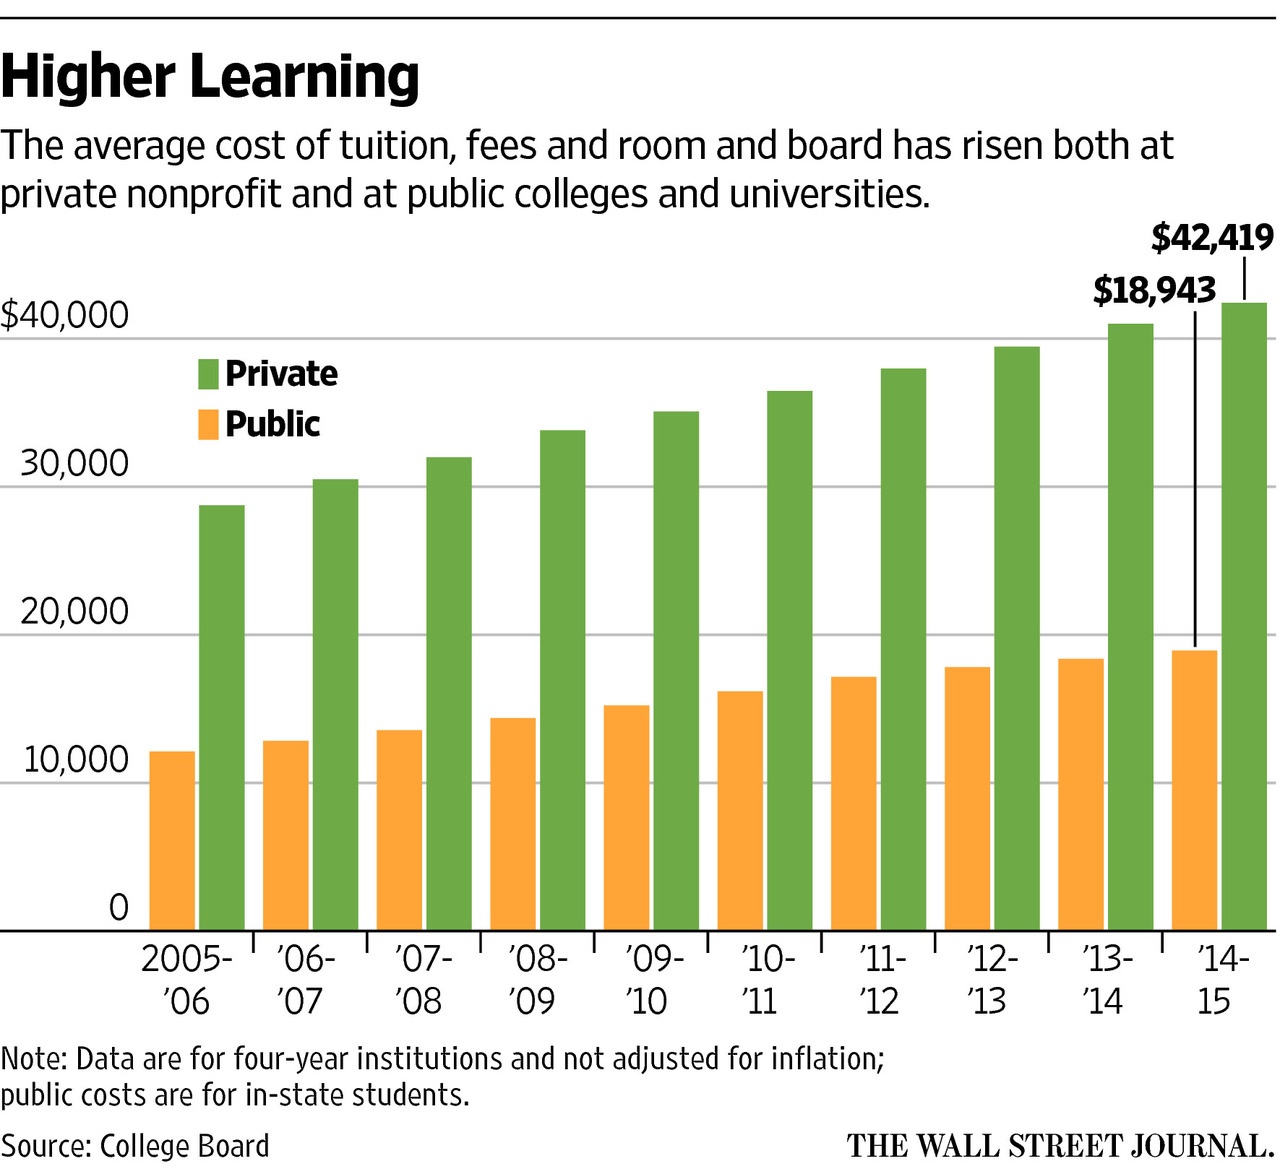 On the Continuous Rise of College Tuition in the U.S